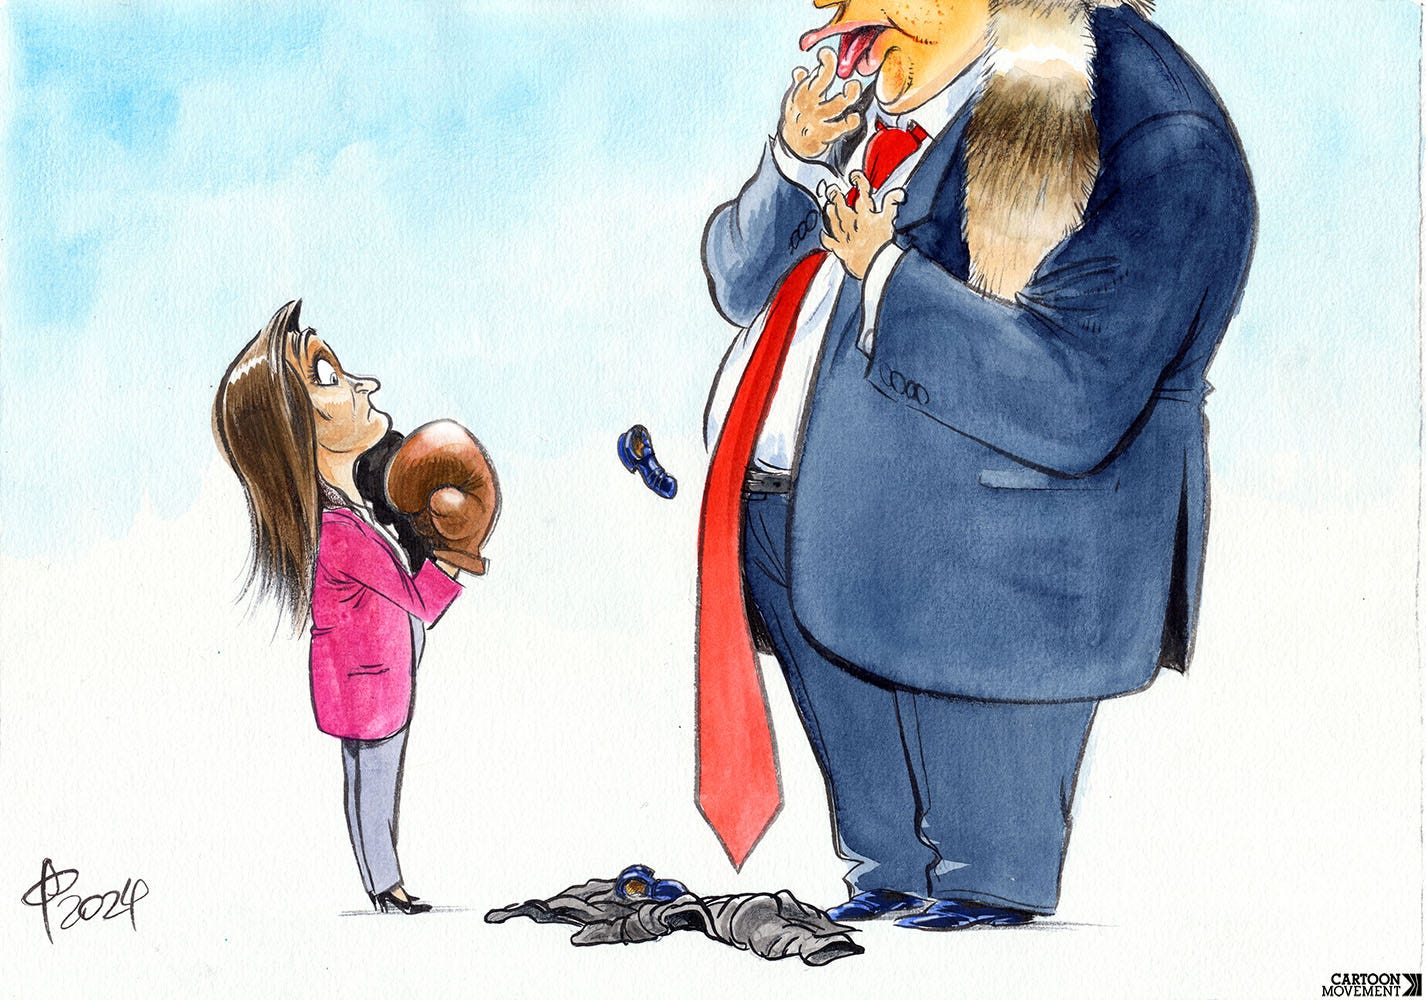 Cartoon showing a giant Trump smacking his mouth and licking his fingers while empty clothes lie on the floor. A much smaller Nikki Haley, wearing boxing gloves, is looking up at Trump with an apprehensive look on her face.